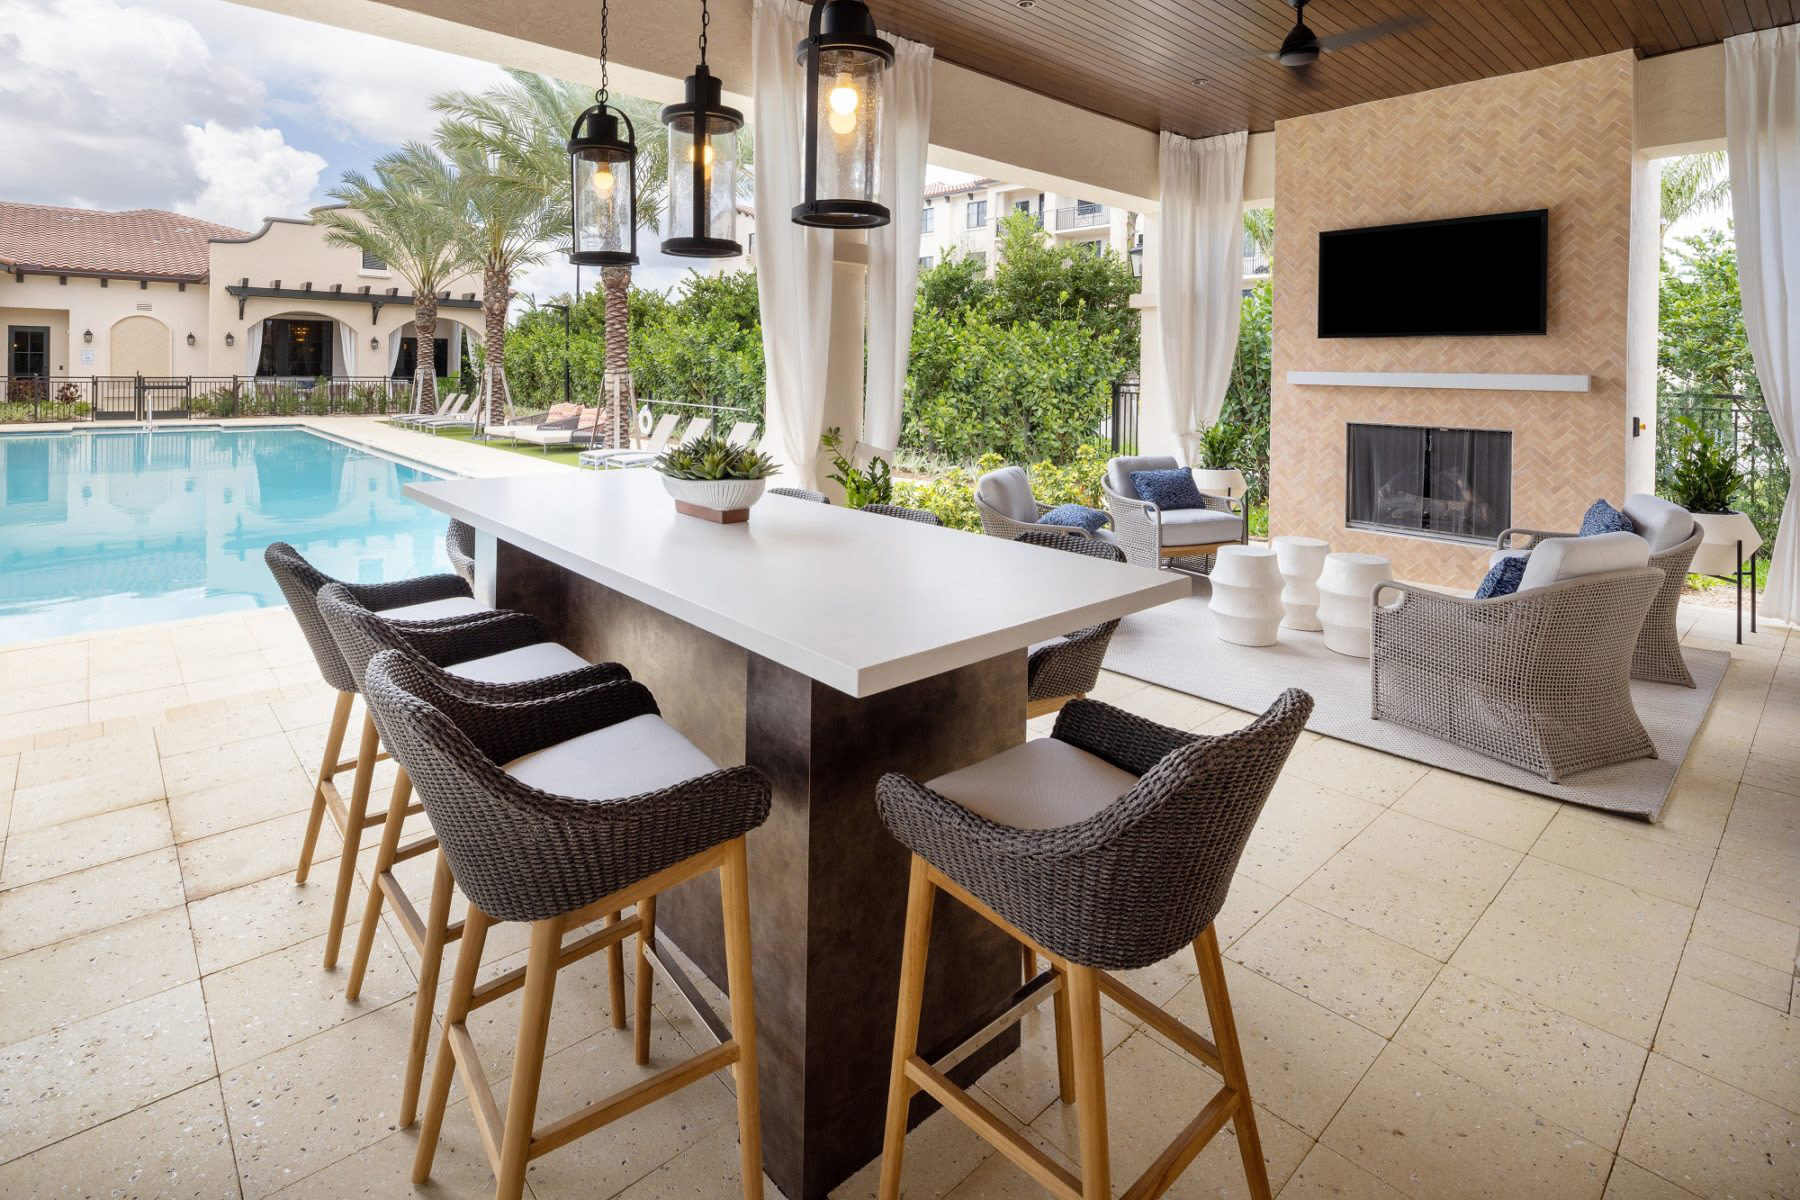 Comfortable poolside seating amidst palm trees at Locklyn West Palm, West Palm Beach, Florida